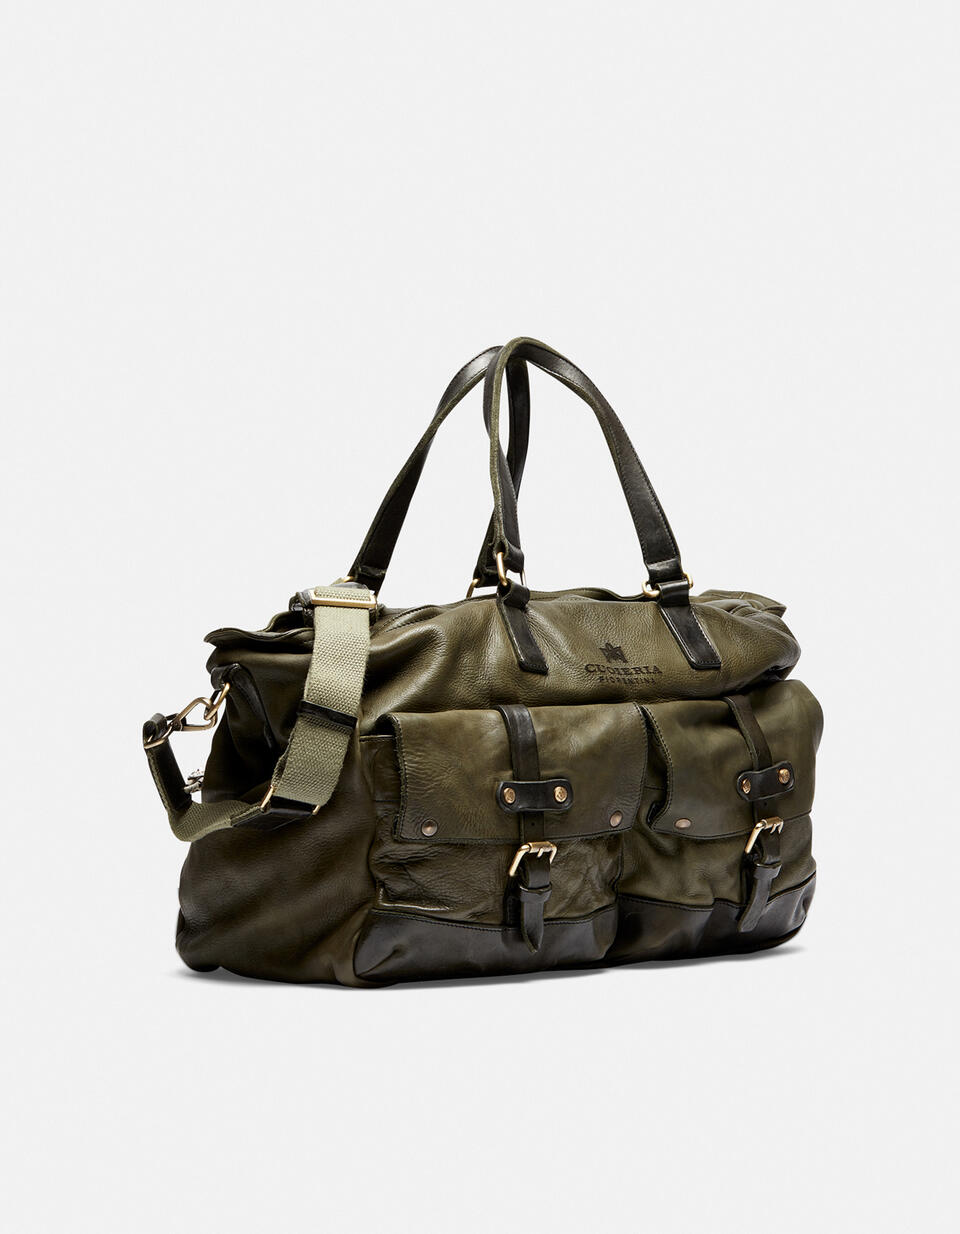 Weekender  - Luggage - Travel Bags - Cuoieria Fiorentina